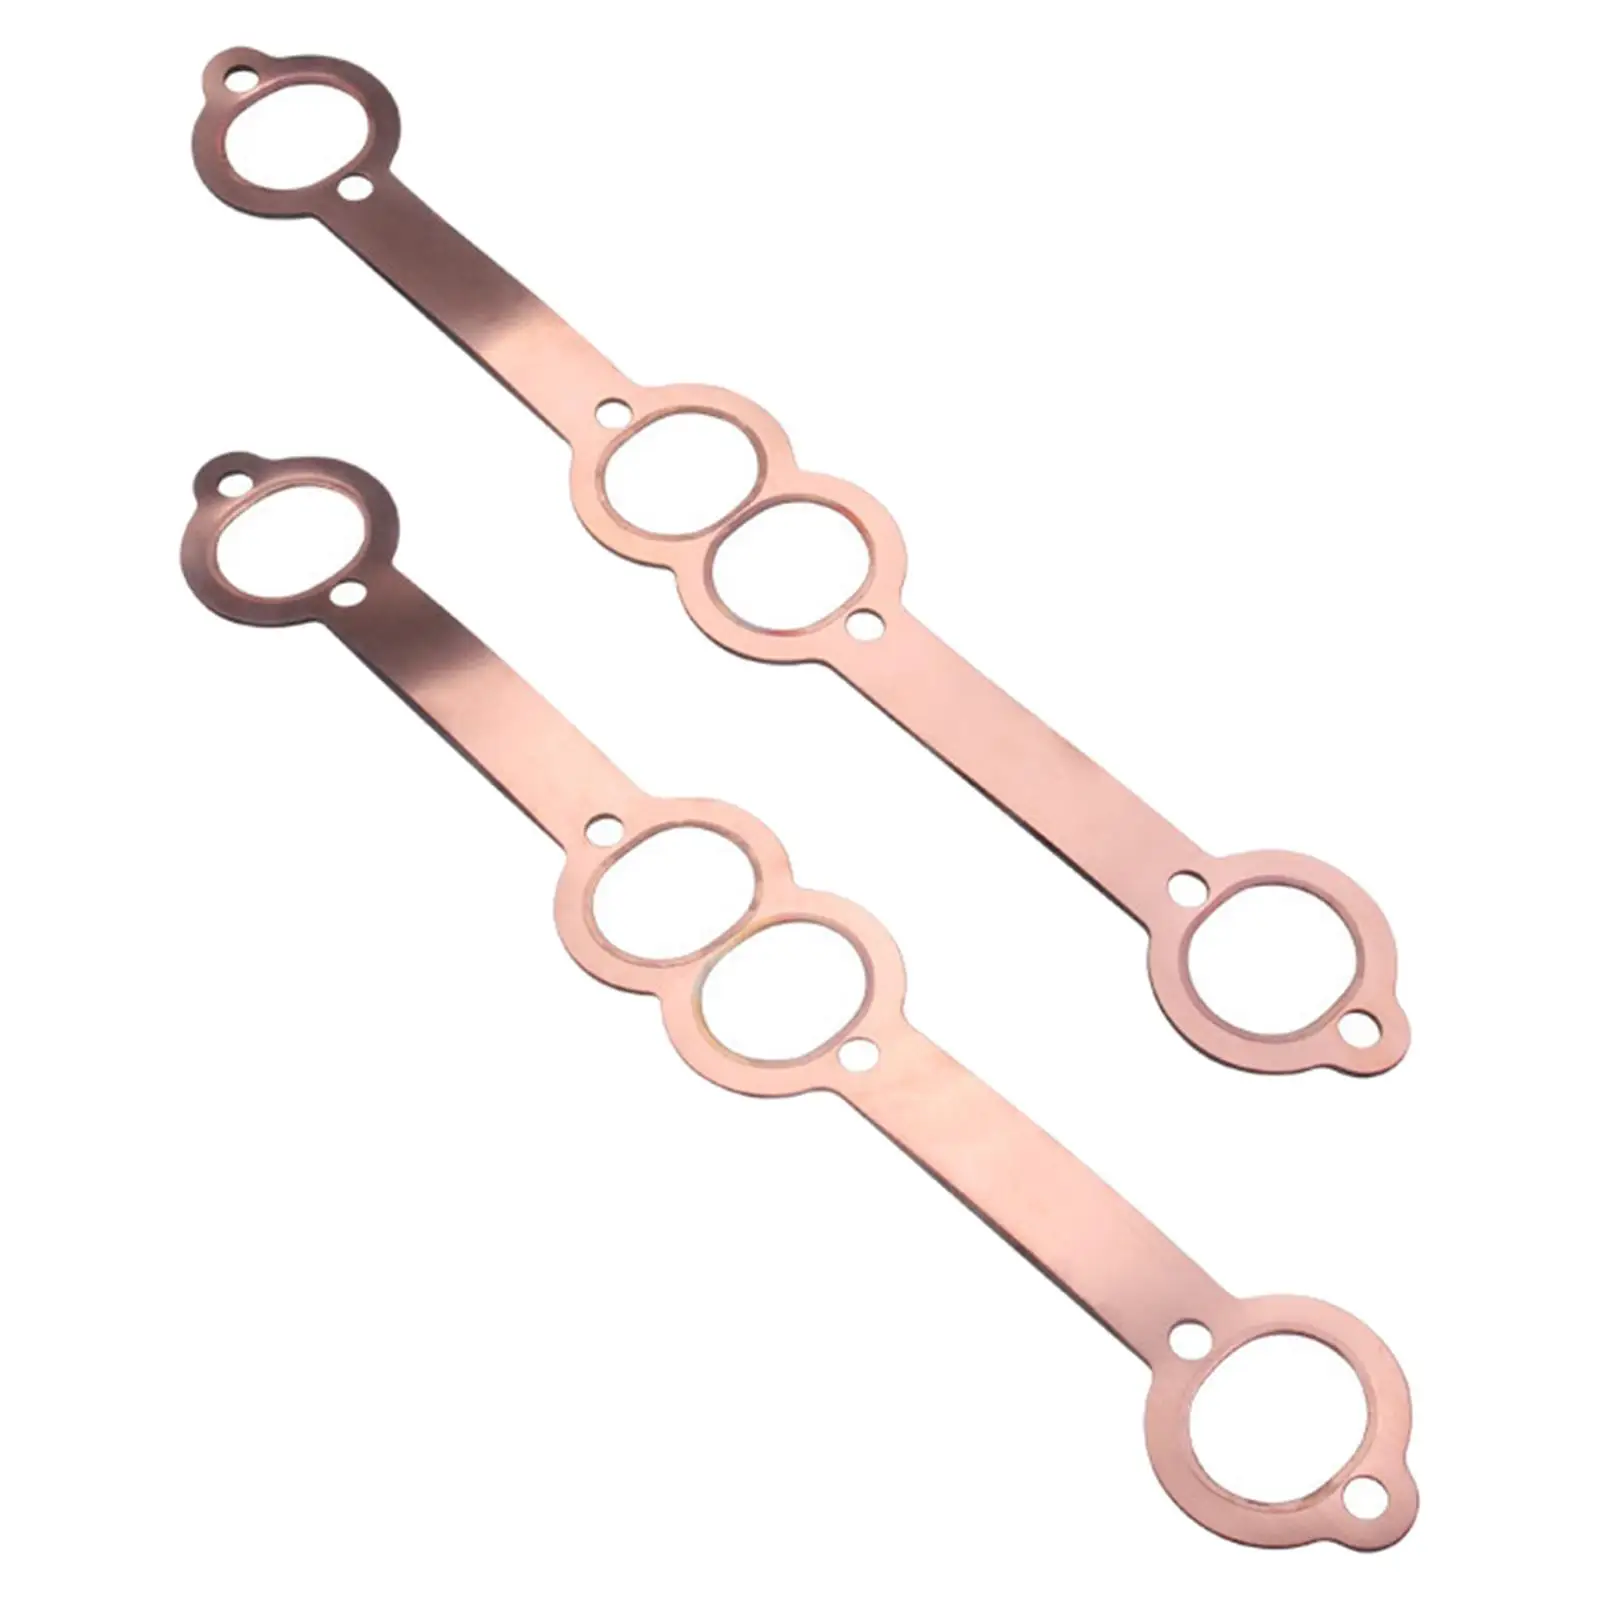 2 Pieces Car Oval Port Sbc Copper Header Exhaust Gaskets, Reusable for Chevy 